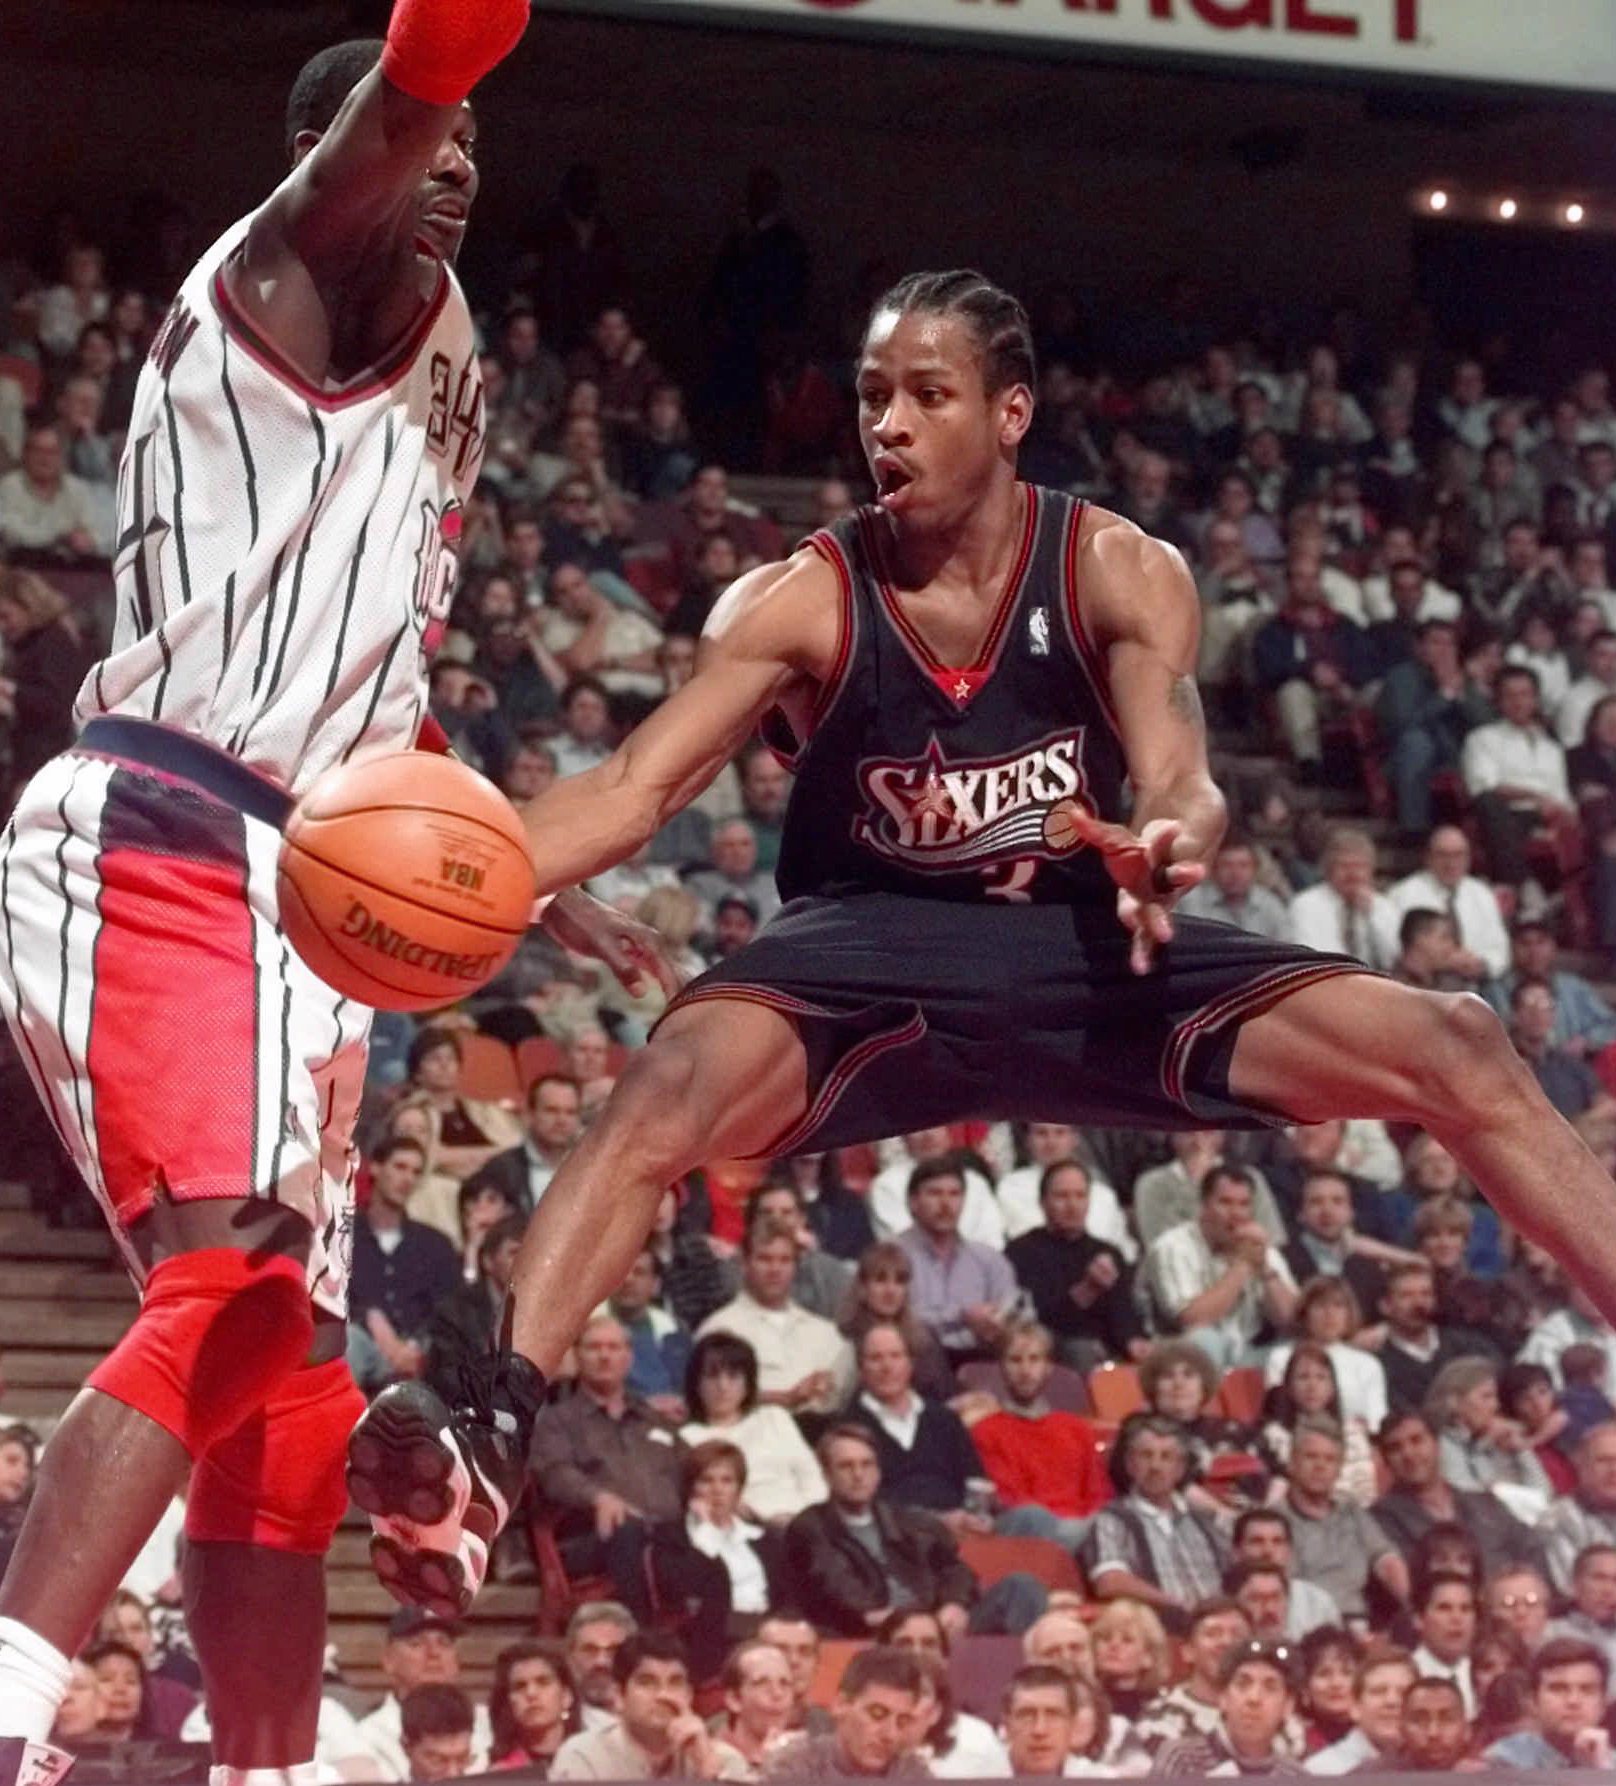 Are the 76ers' iconic black jerseys making a return?